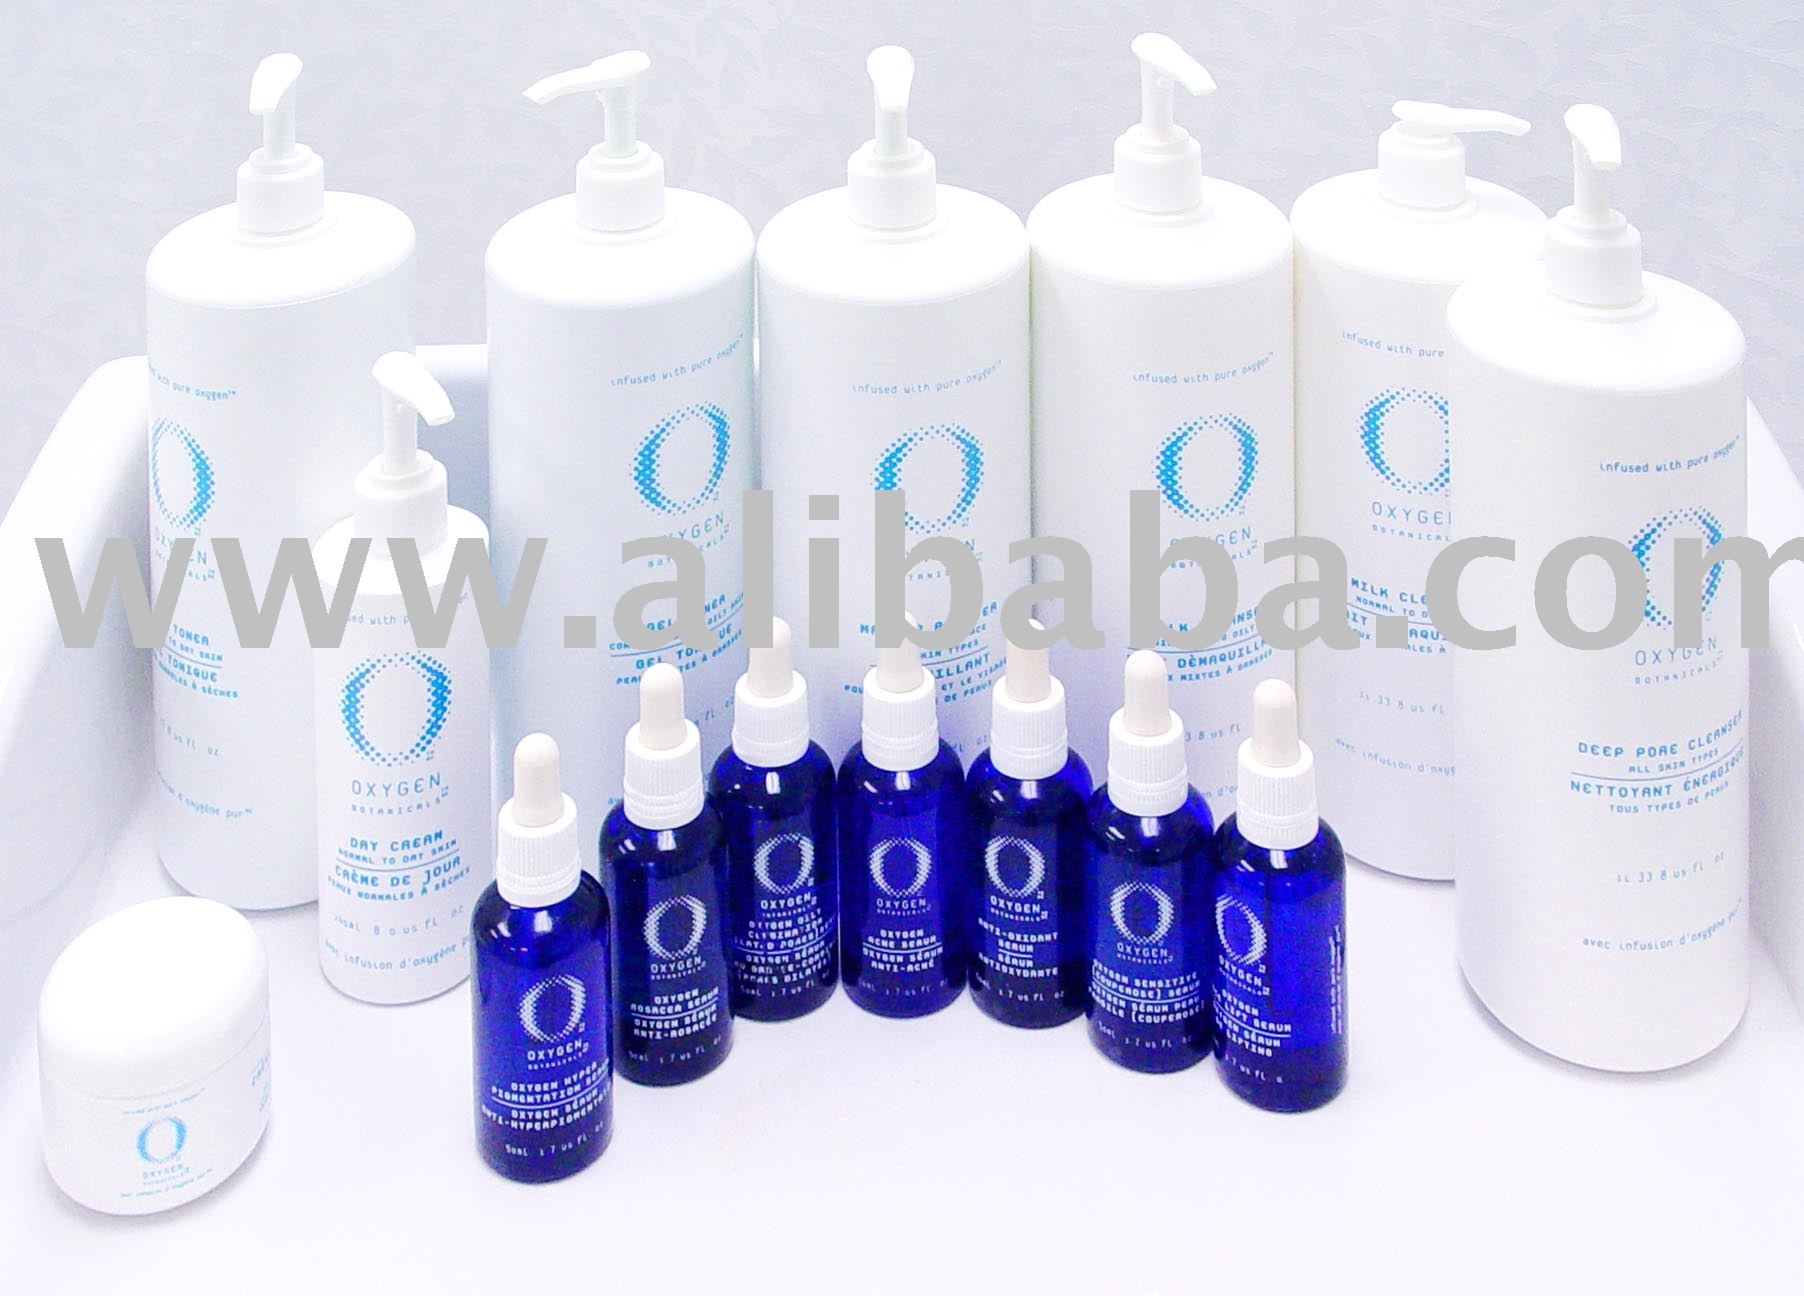 Oxygen Facial Products 72